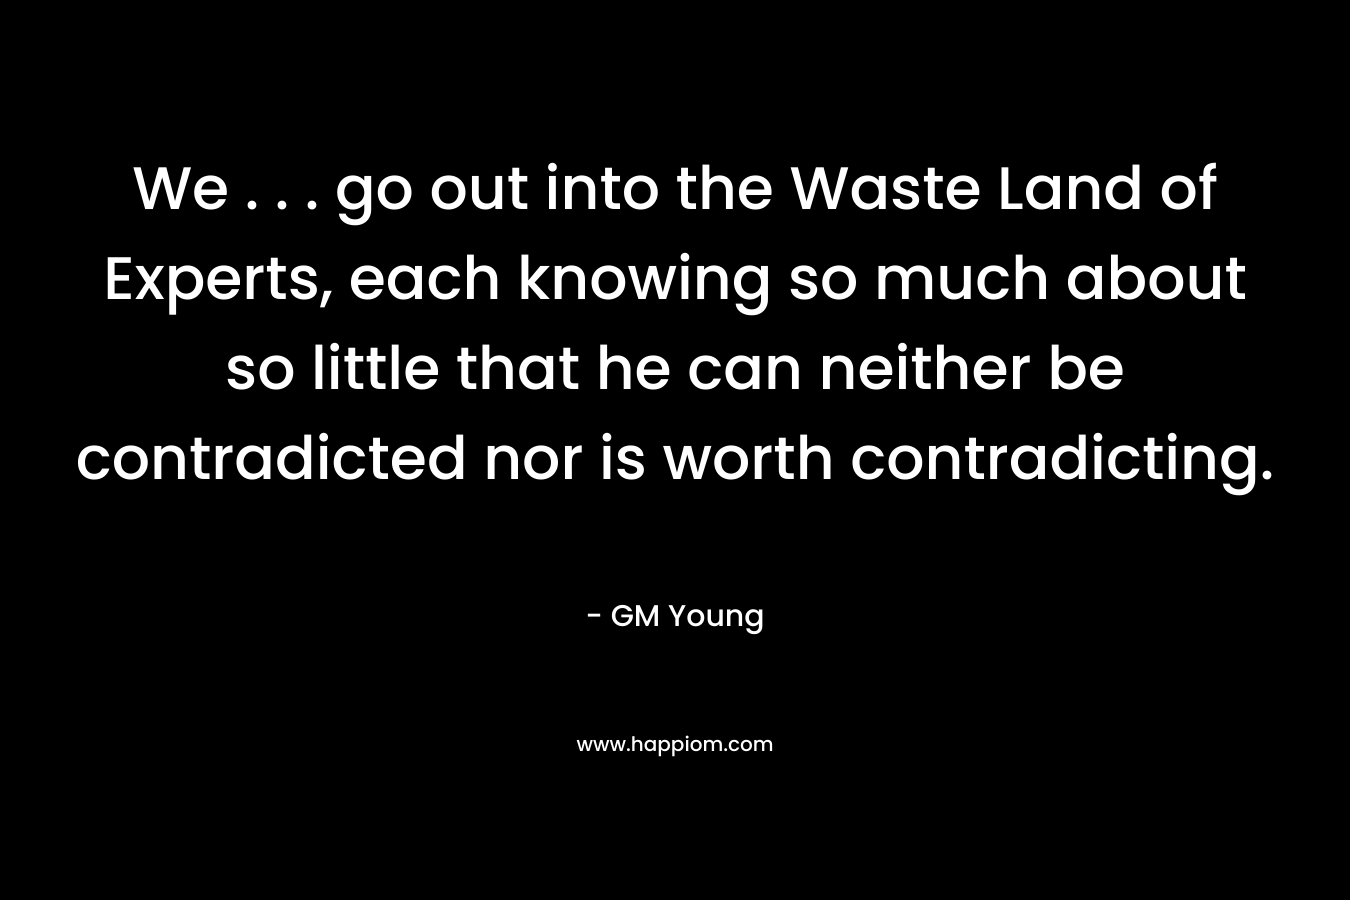 We . . . go out into the Waste Land of Experts, each knowing so much about so little that he can neither be contradicted nor is worth contradicting.